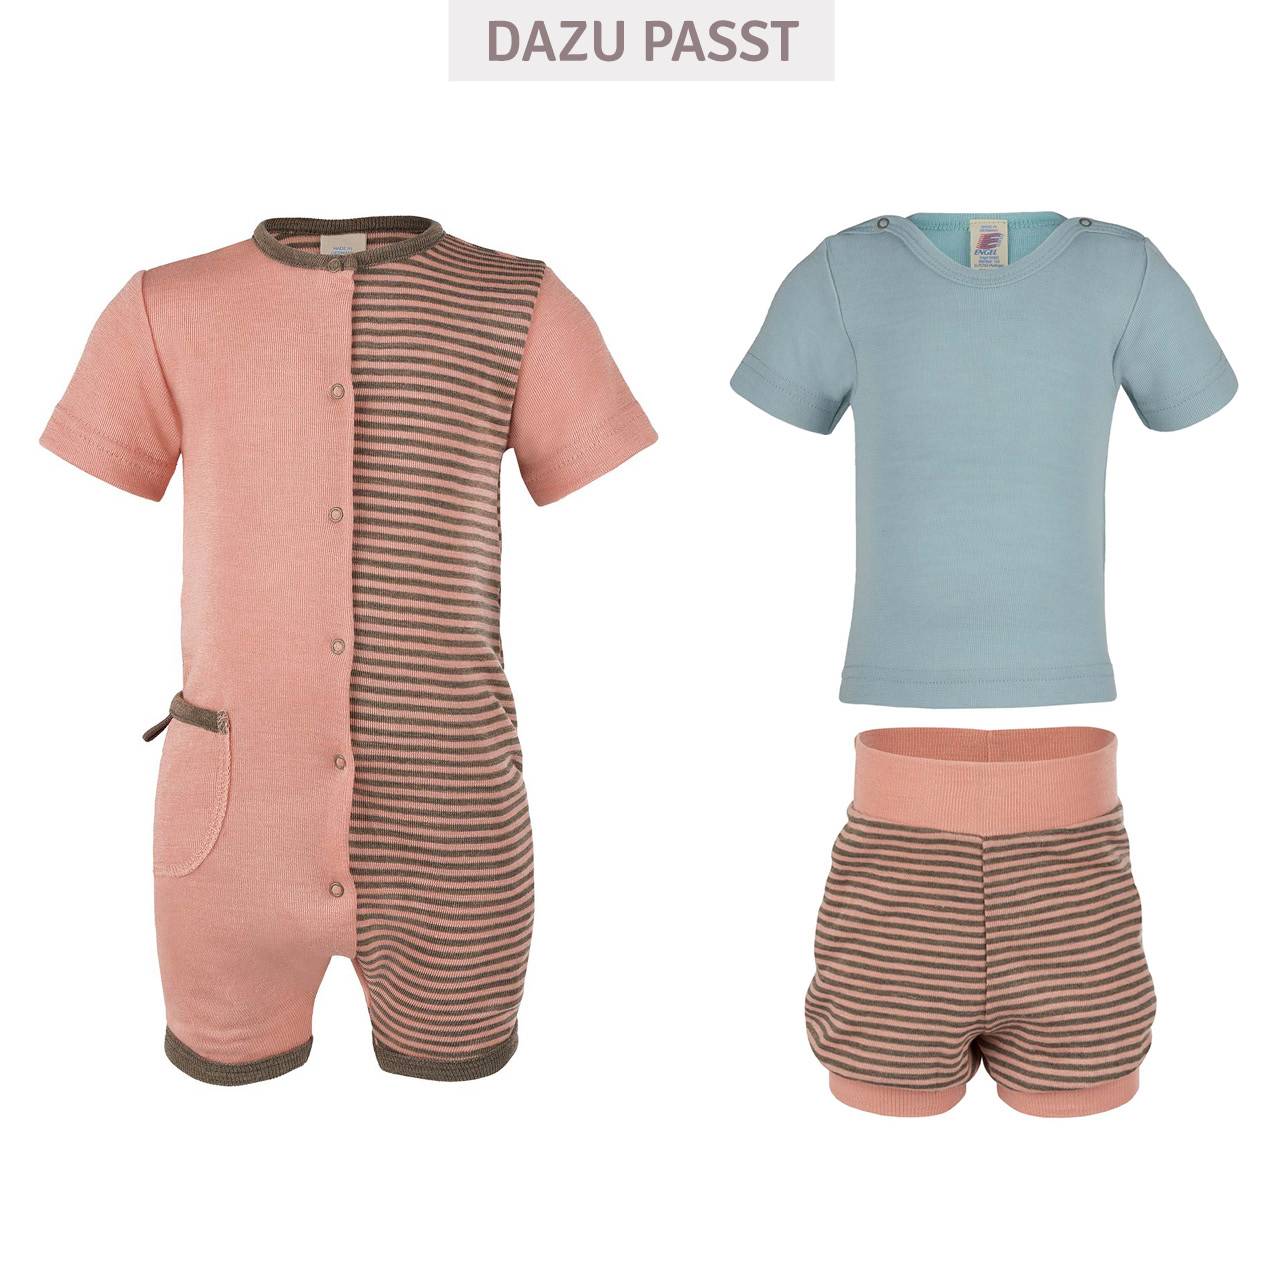 Babyshorts Wolle Seide in lachs